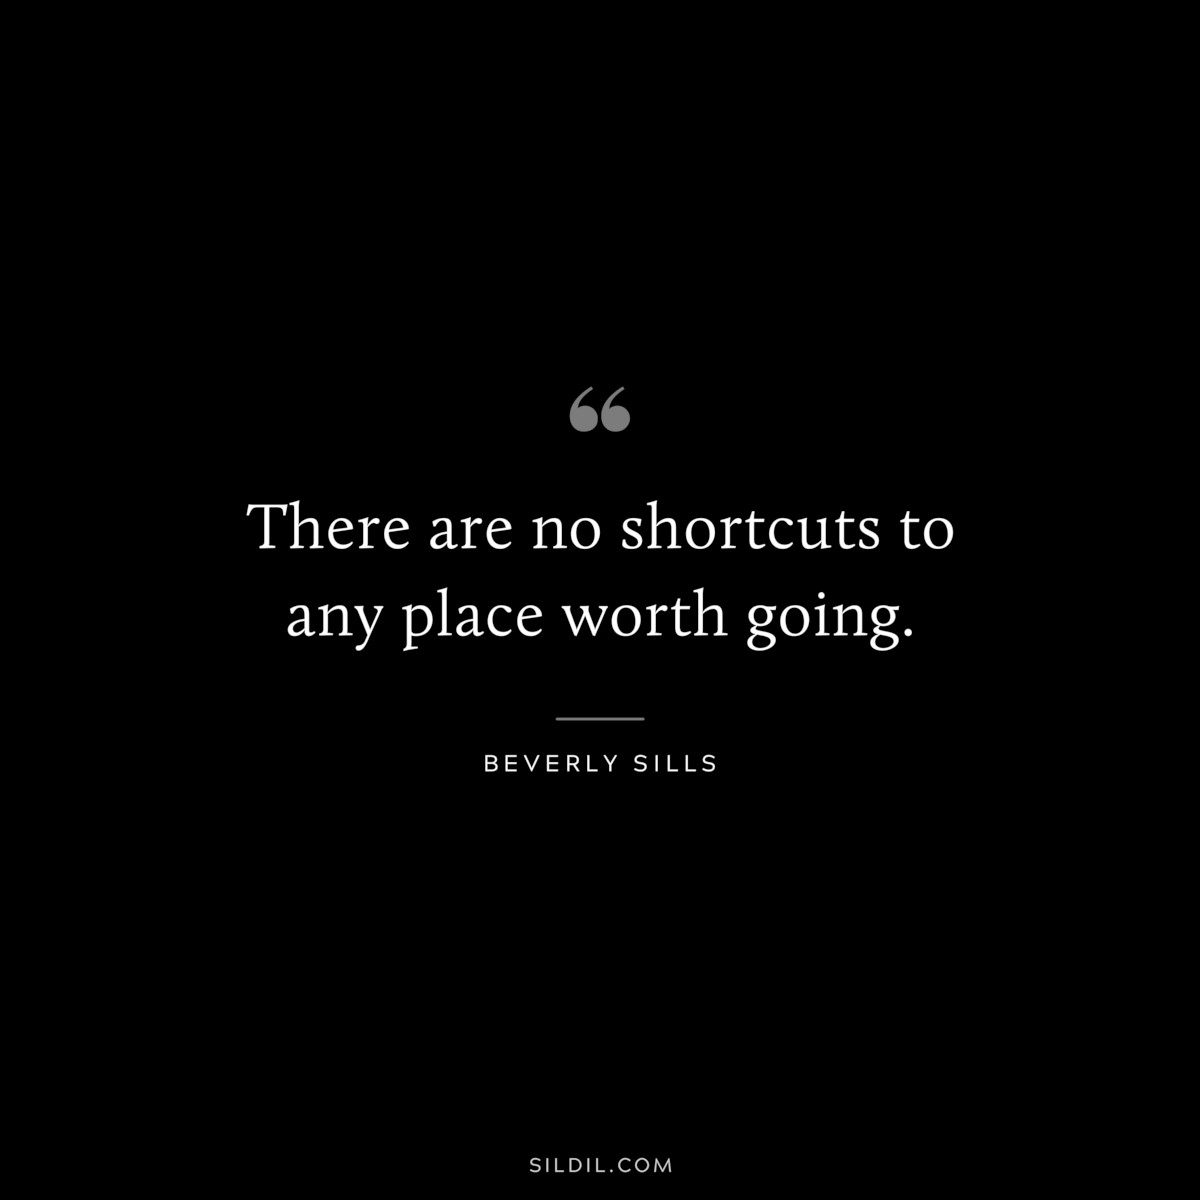 There are no shortcuts to any place worth going. ― Beverly Sills